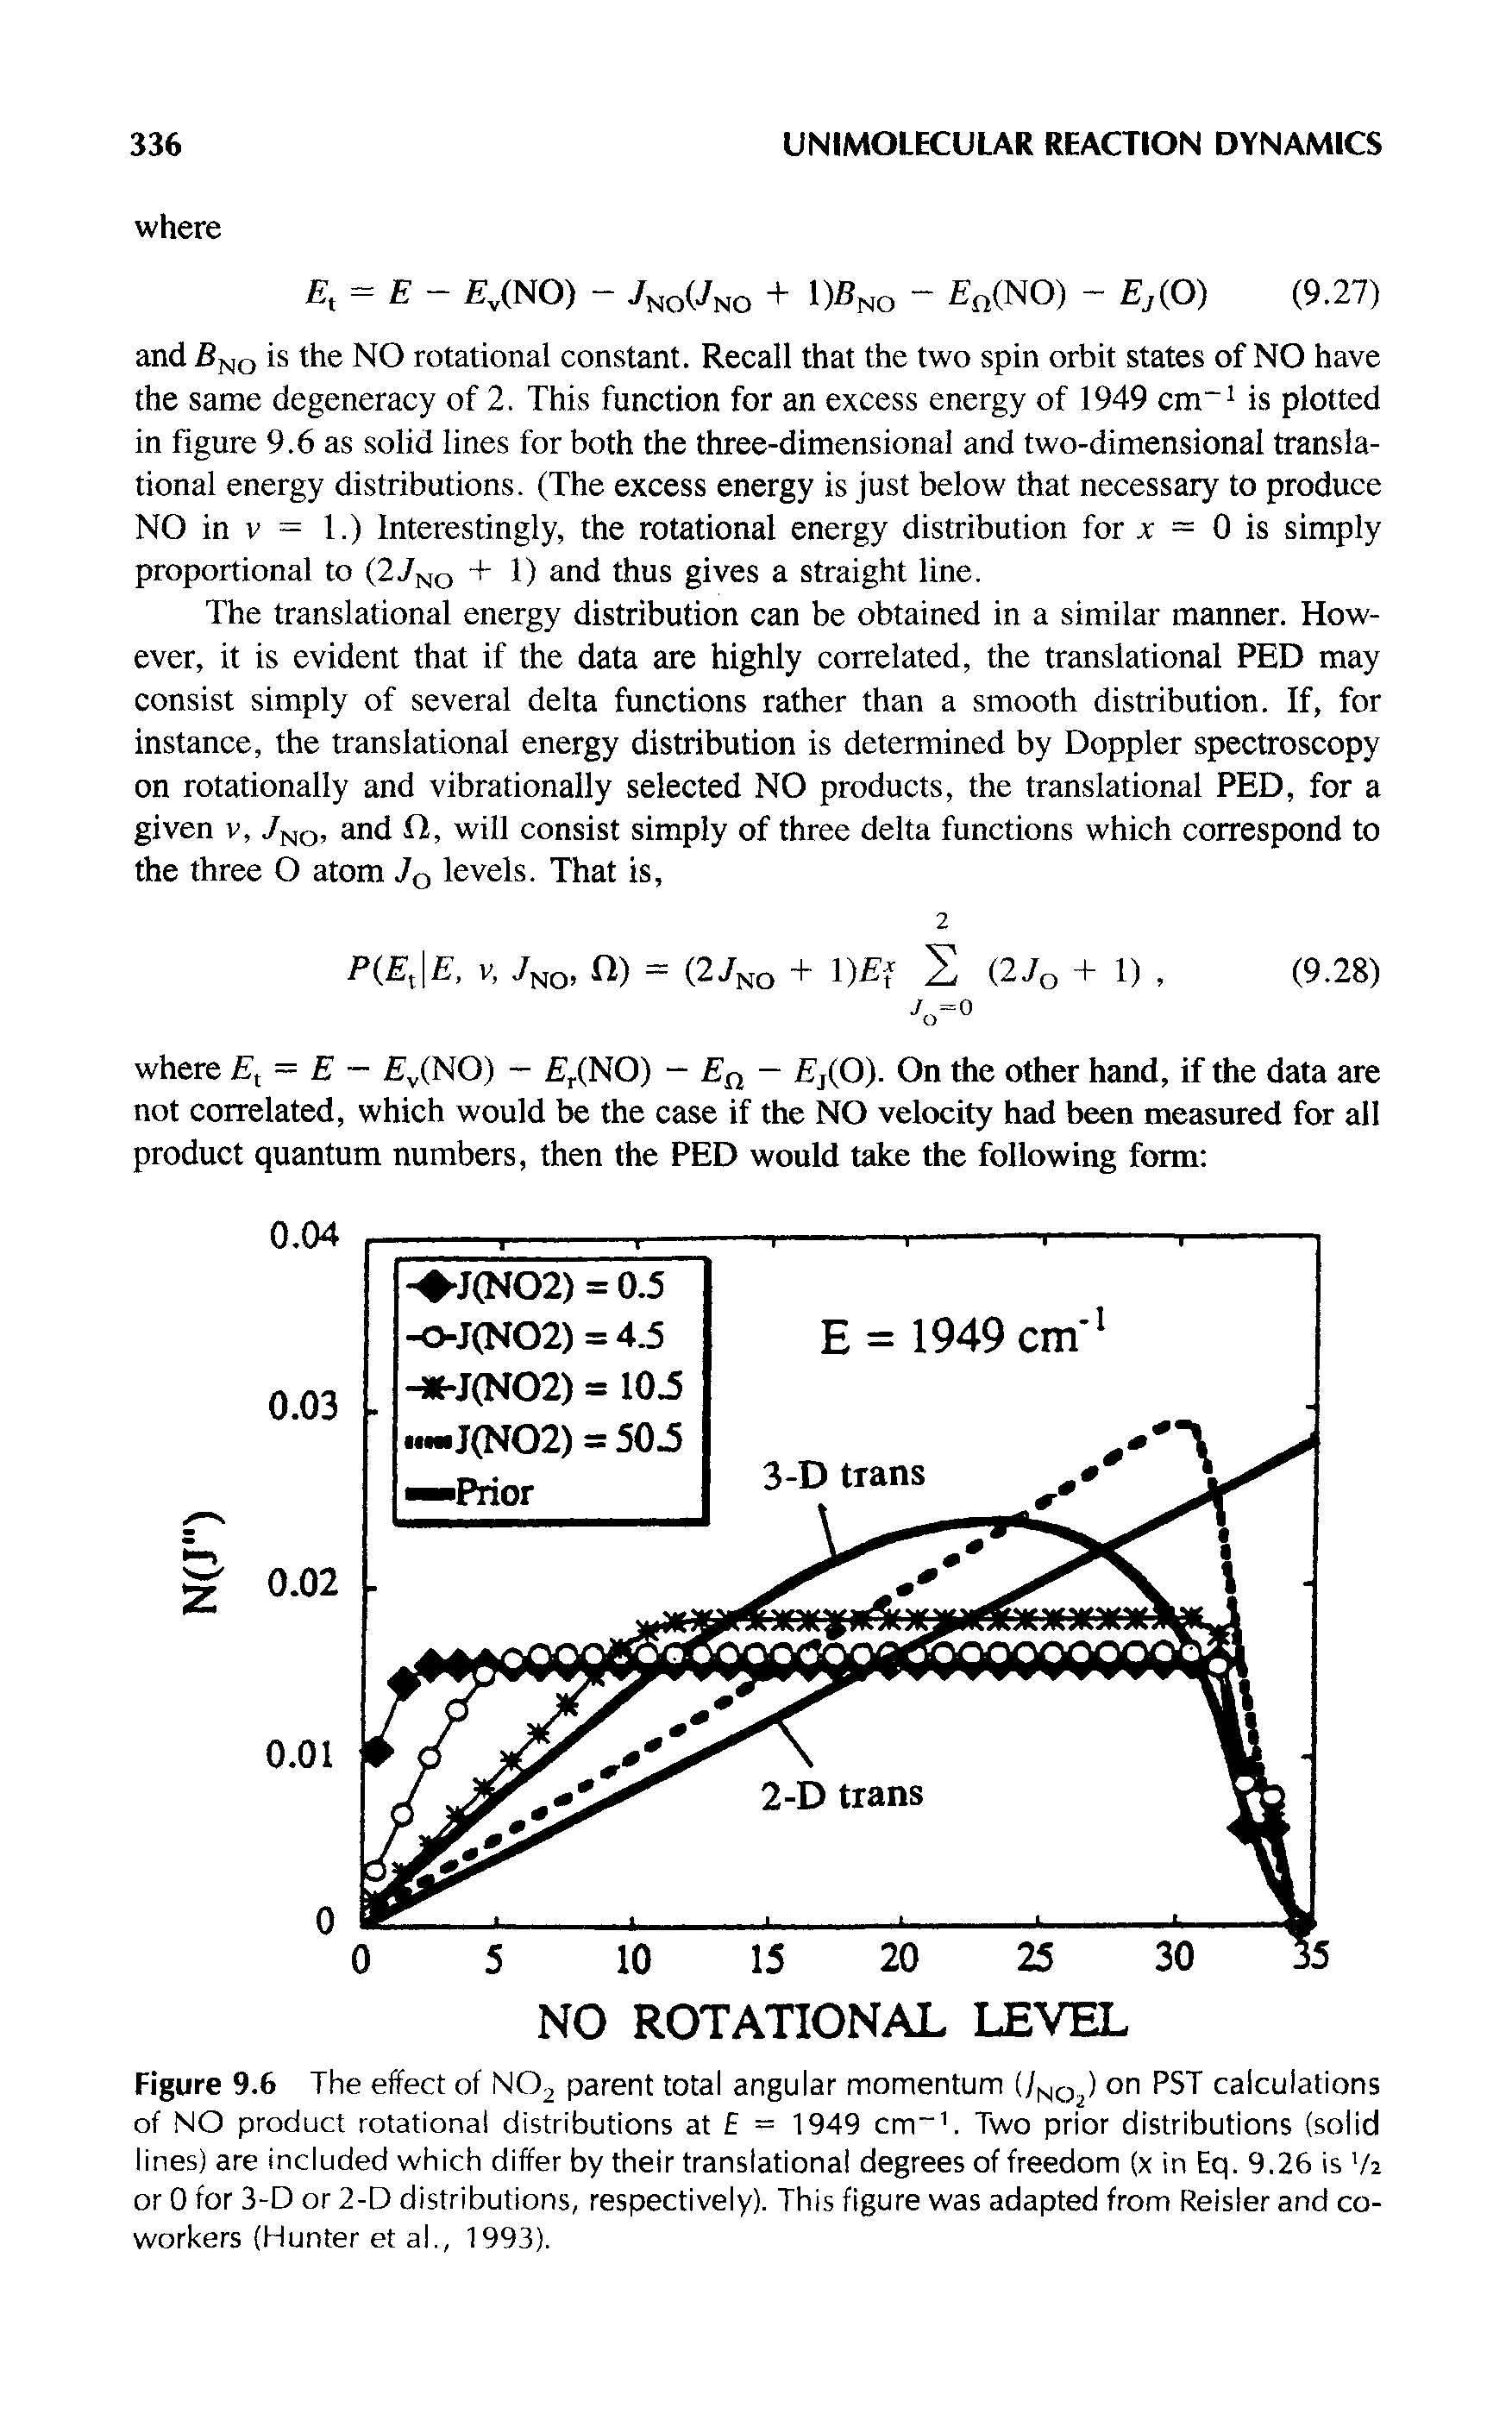 Figure 9.6 The effect of NO2 parent total angular momentum (/ mq ) on PST calculations of NO product rotational distributions at = 1949 cm T Two prior distributions (solid lines) are included which differ by their translational degrees of freedom (x in Eq. 9.26 is V2 or 0 for 3-D or 2-D distributions, respectively). This figure was adapted from Reisler and coworkers (Hunter et al., 1993).